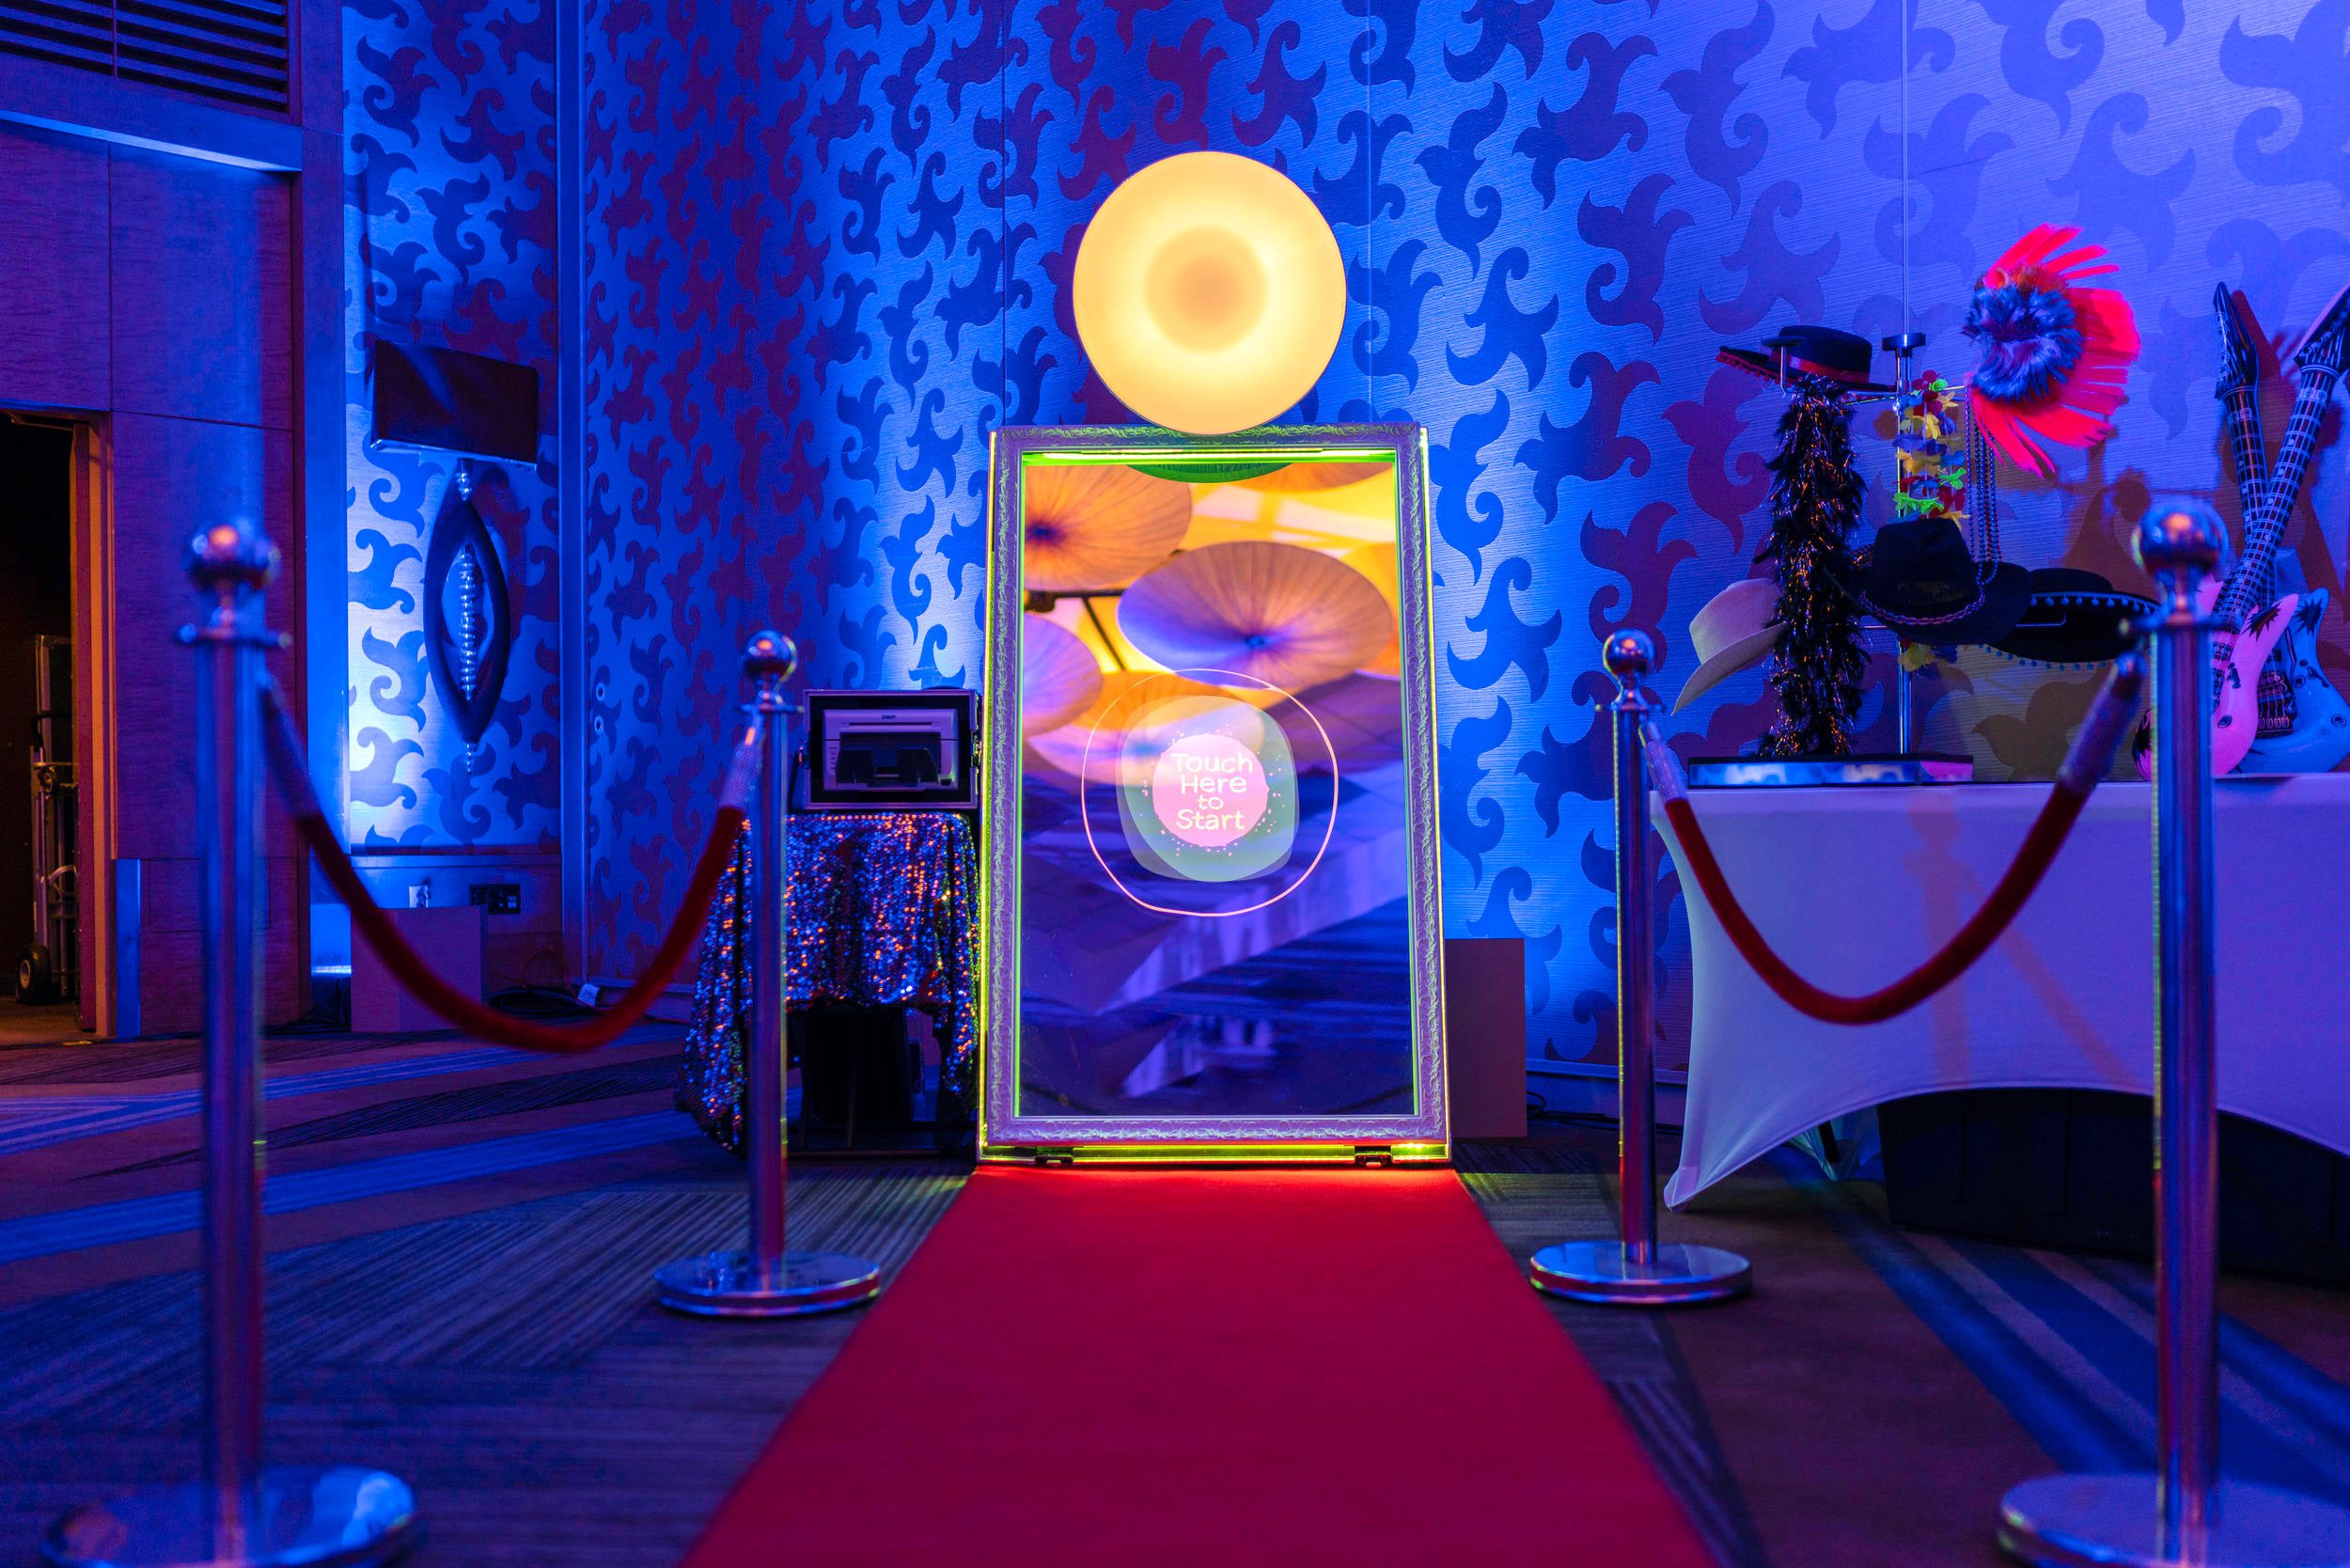 Capture the Magic with our VIP Gold Stanchions and Red Velvet Ropes Magic Mirror Photo Booth